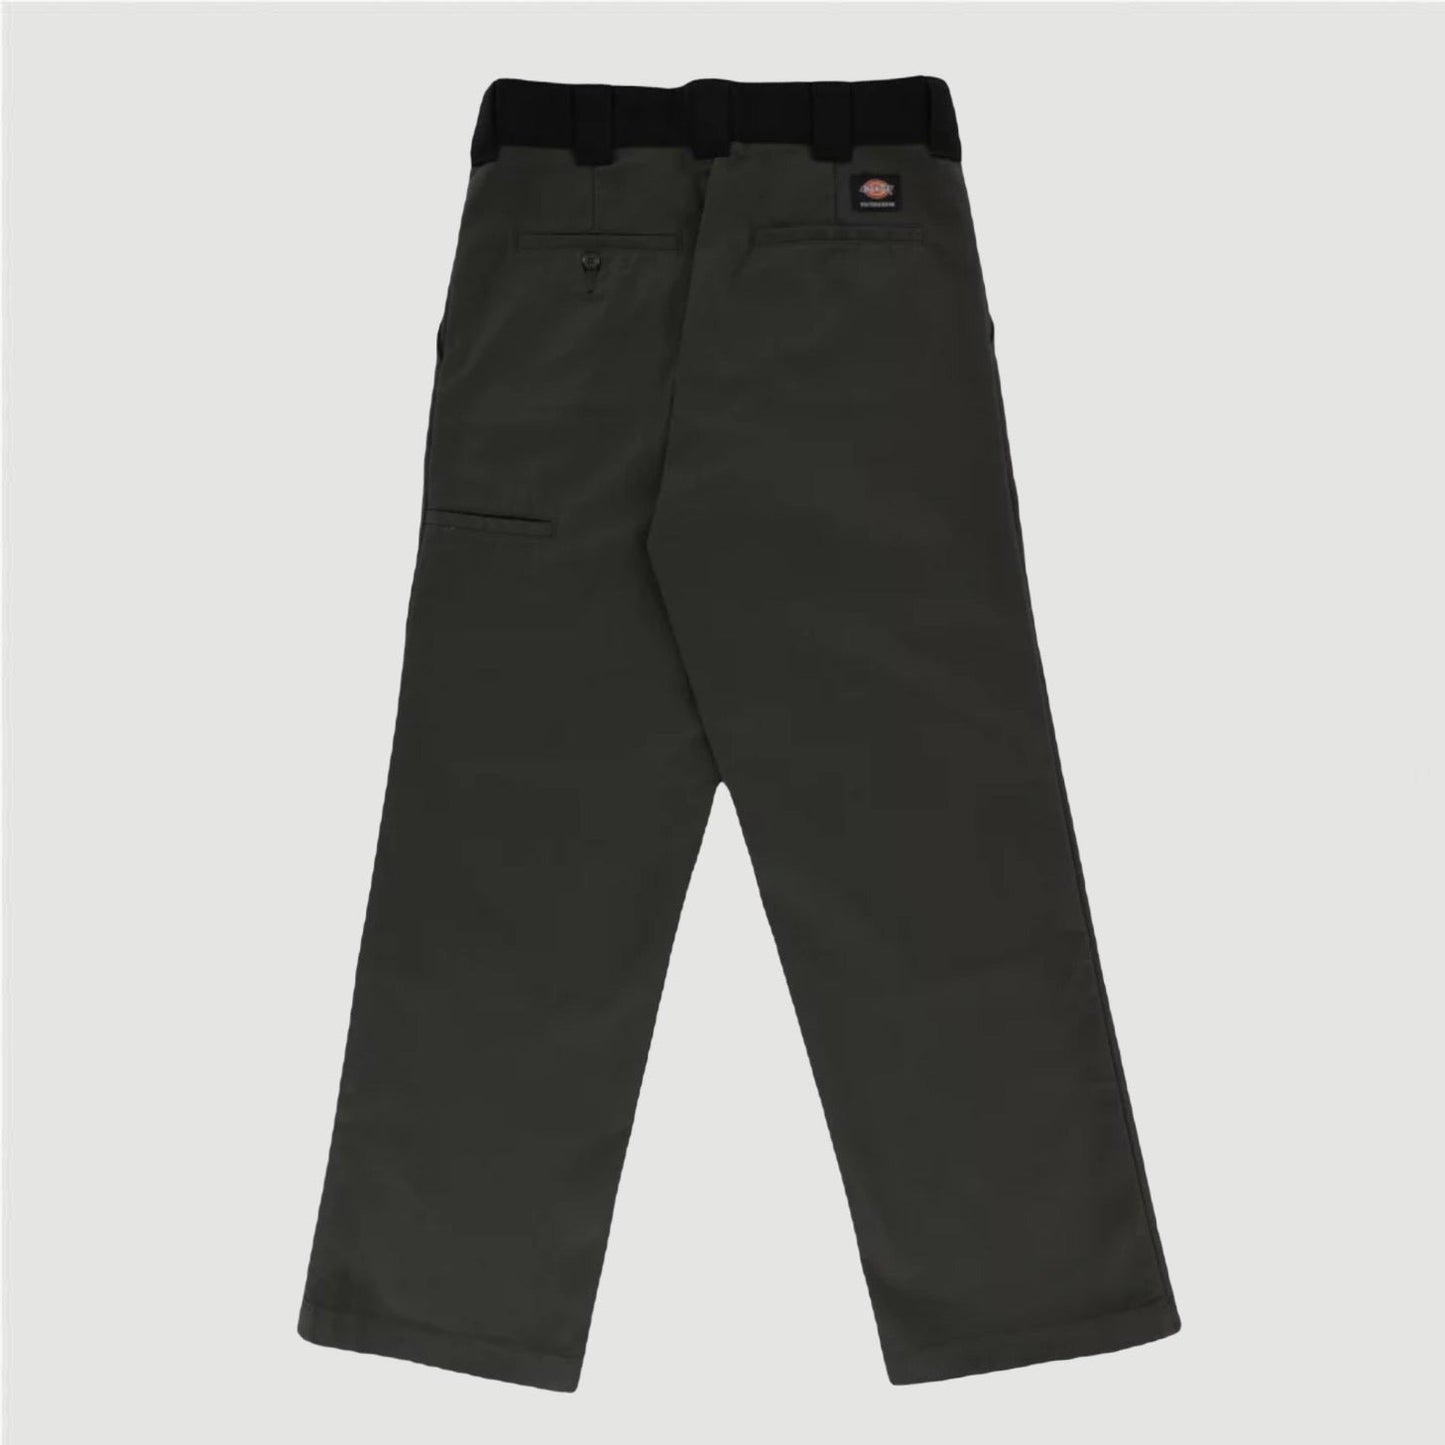 Dickies Ronnie Sandoval Double Knee Twill Pant Olive